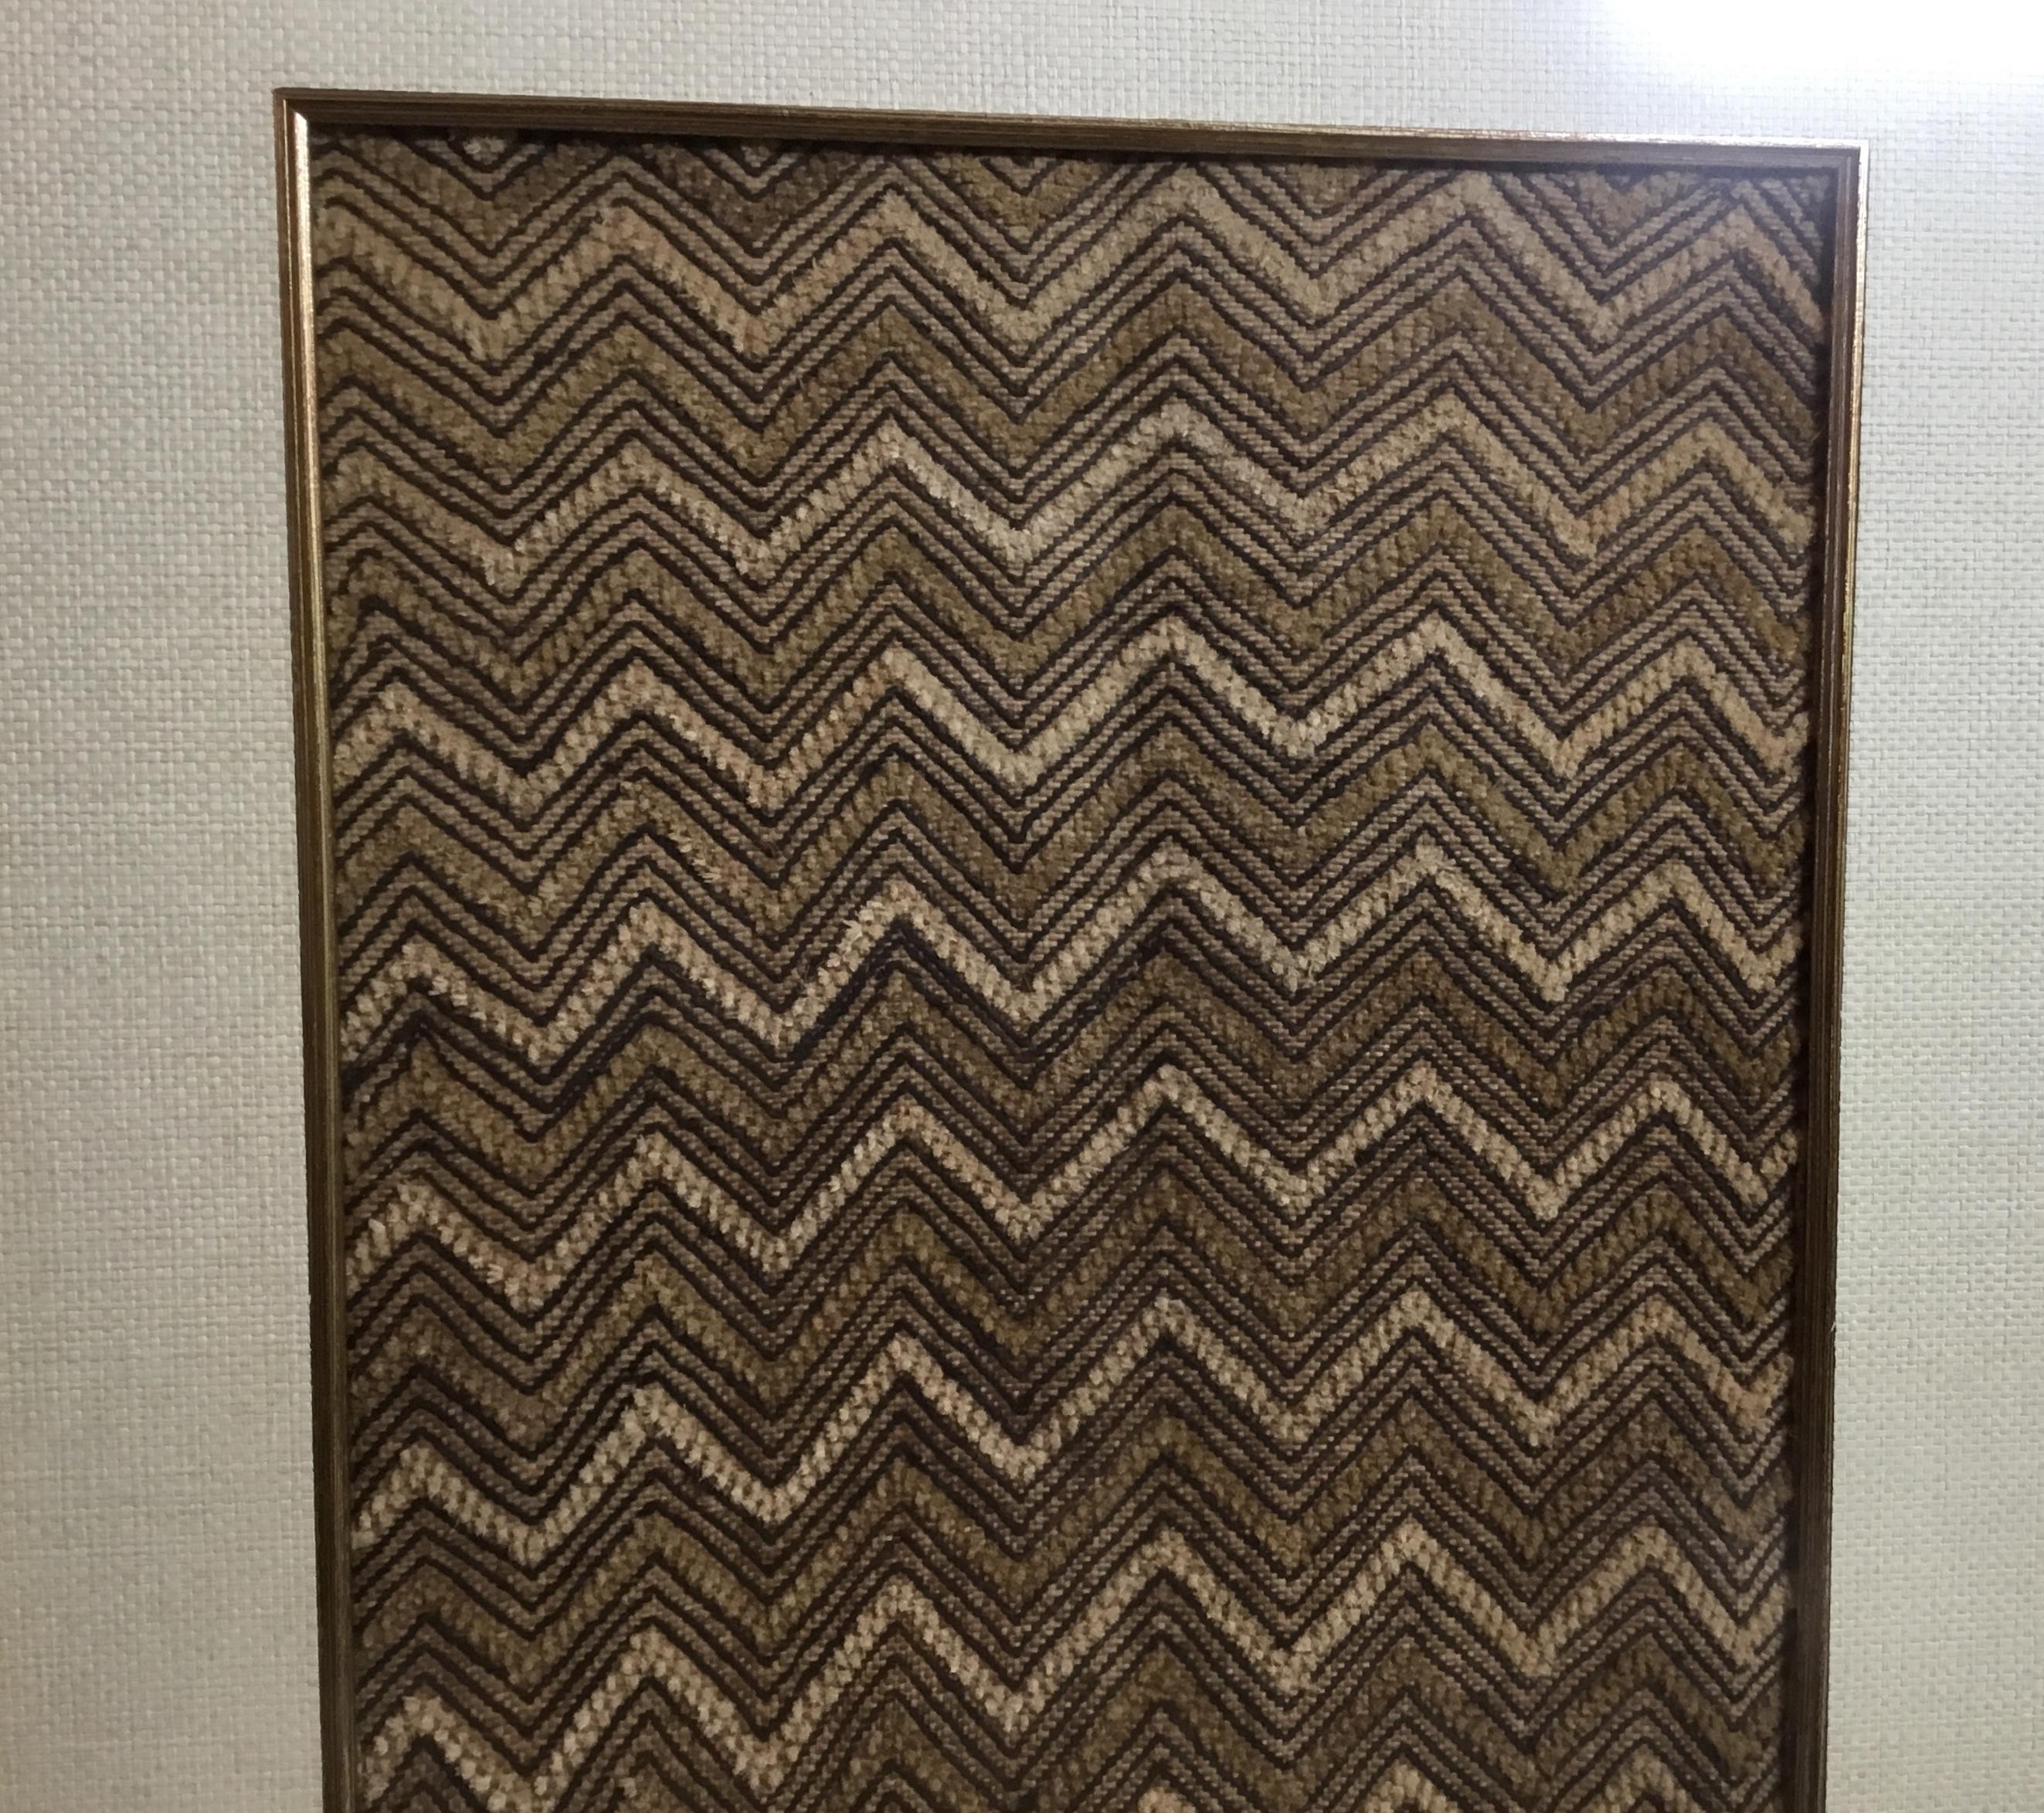 Woven Pair of Framed Handwoven Faffia Cloth from Congo